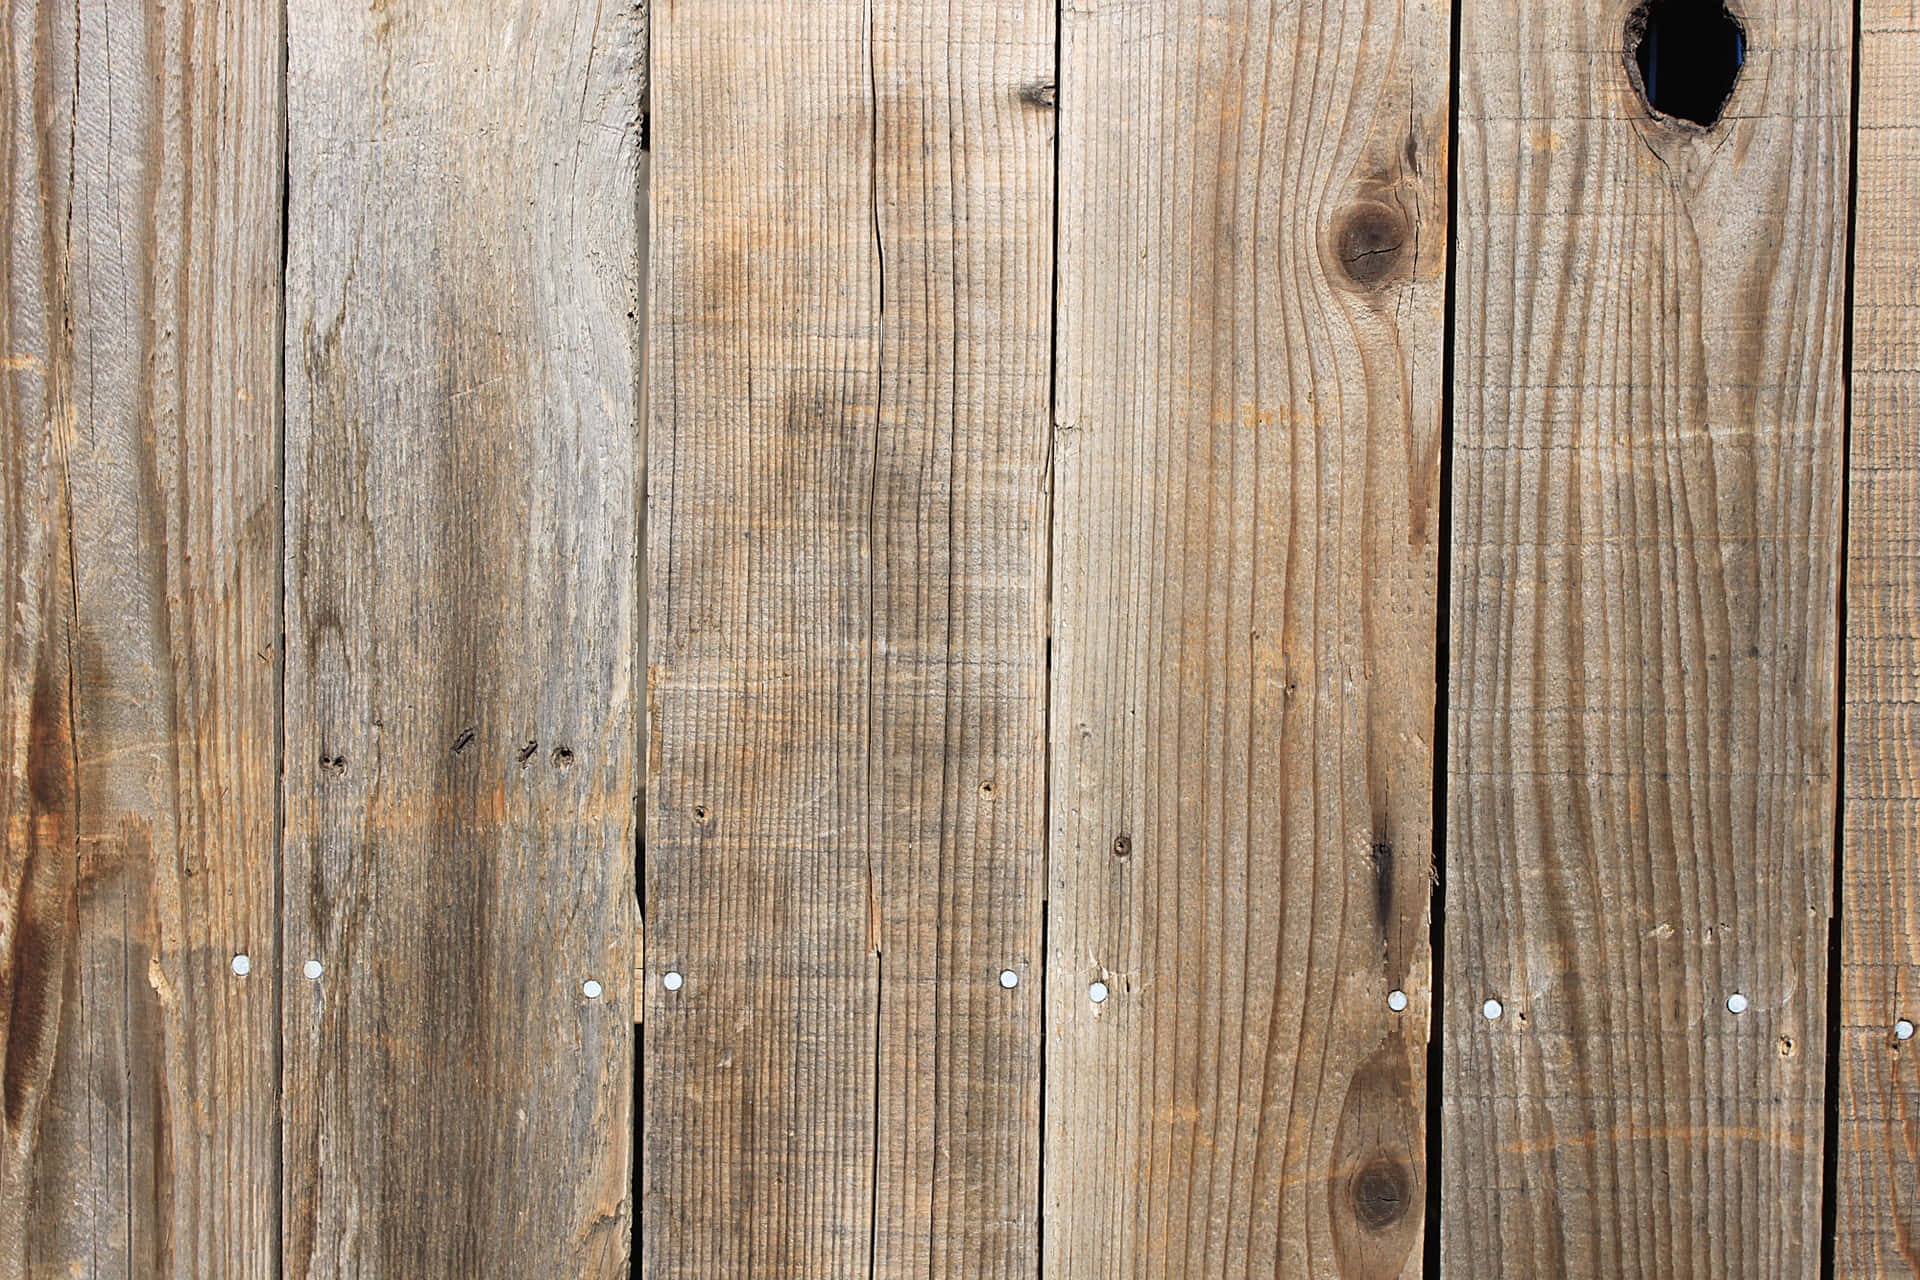 Rustic Wood Background Nailed Wooden Surface